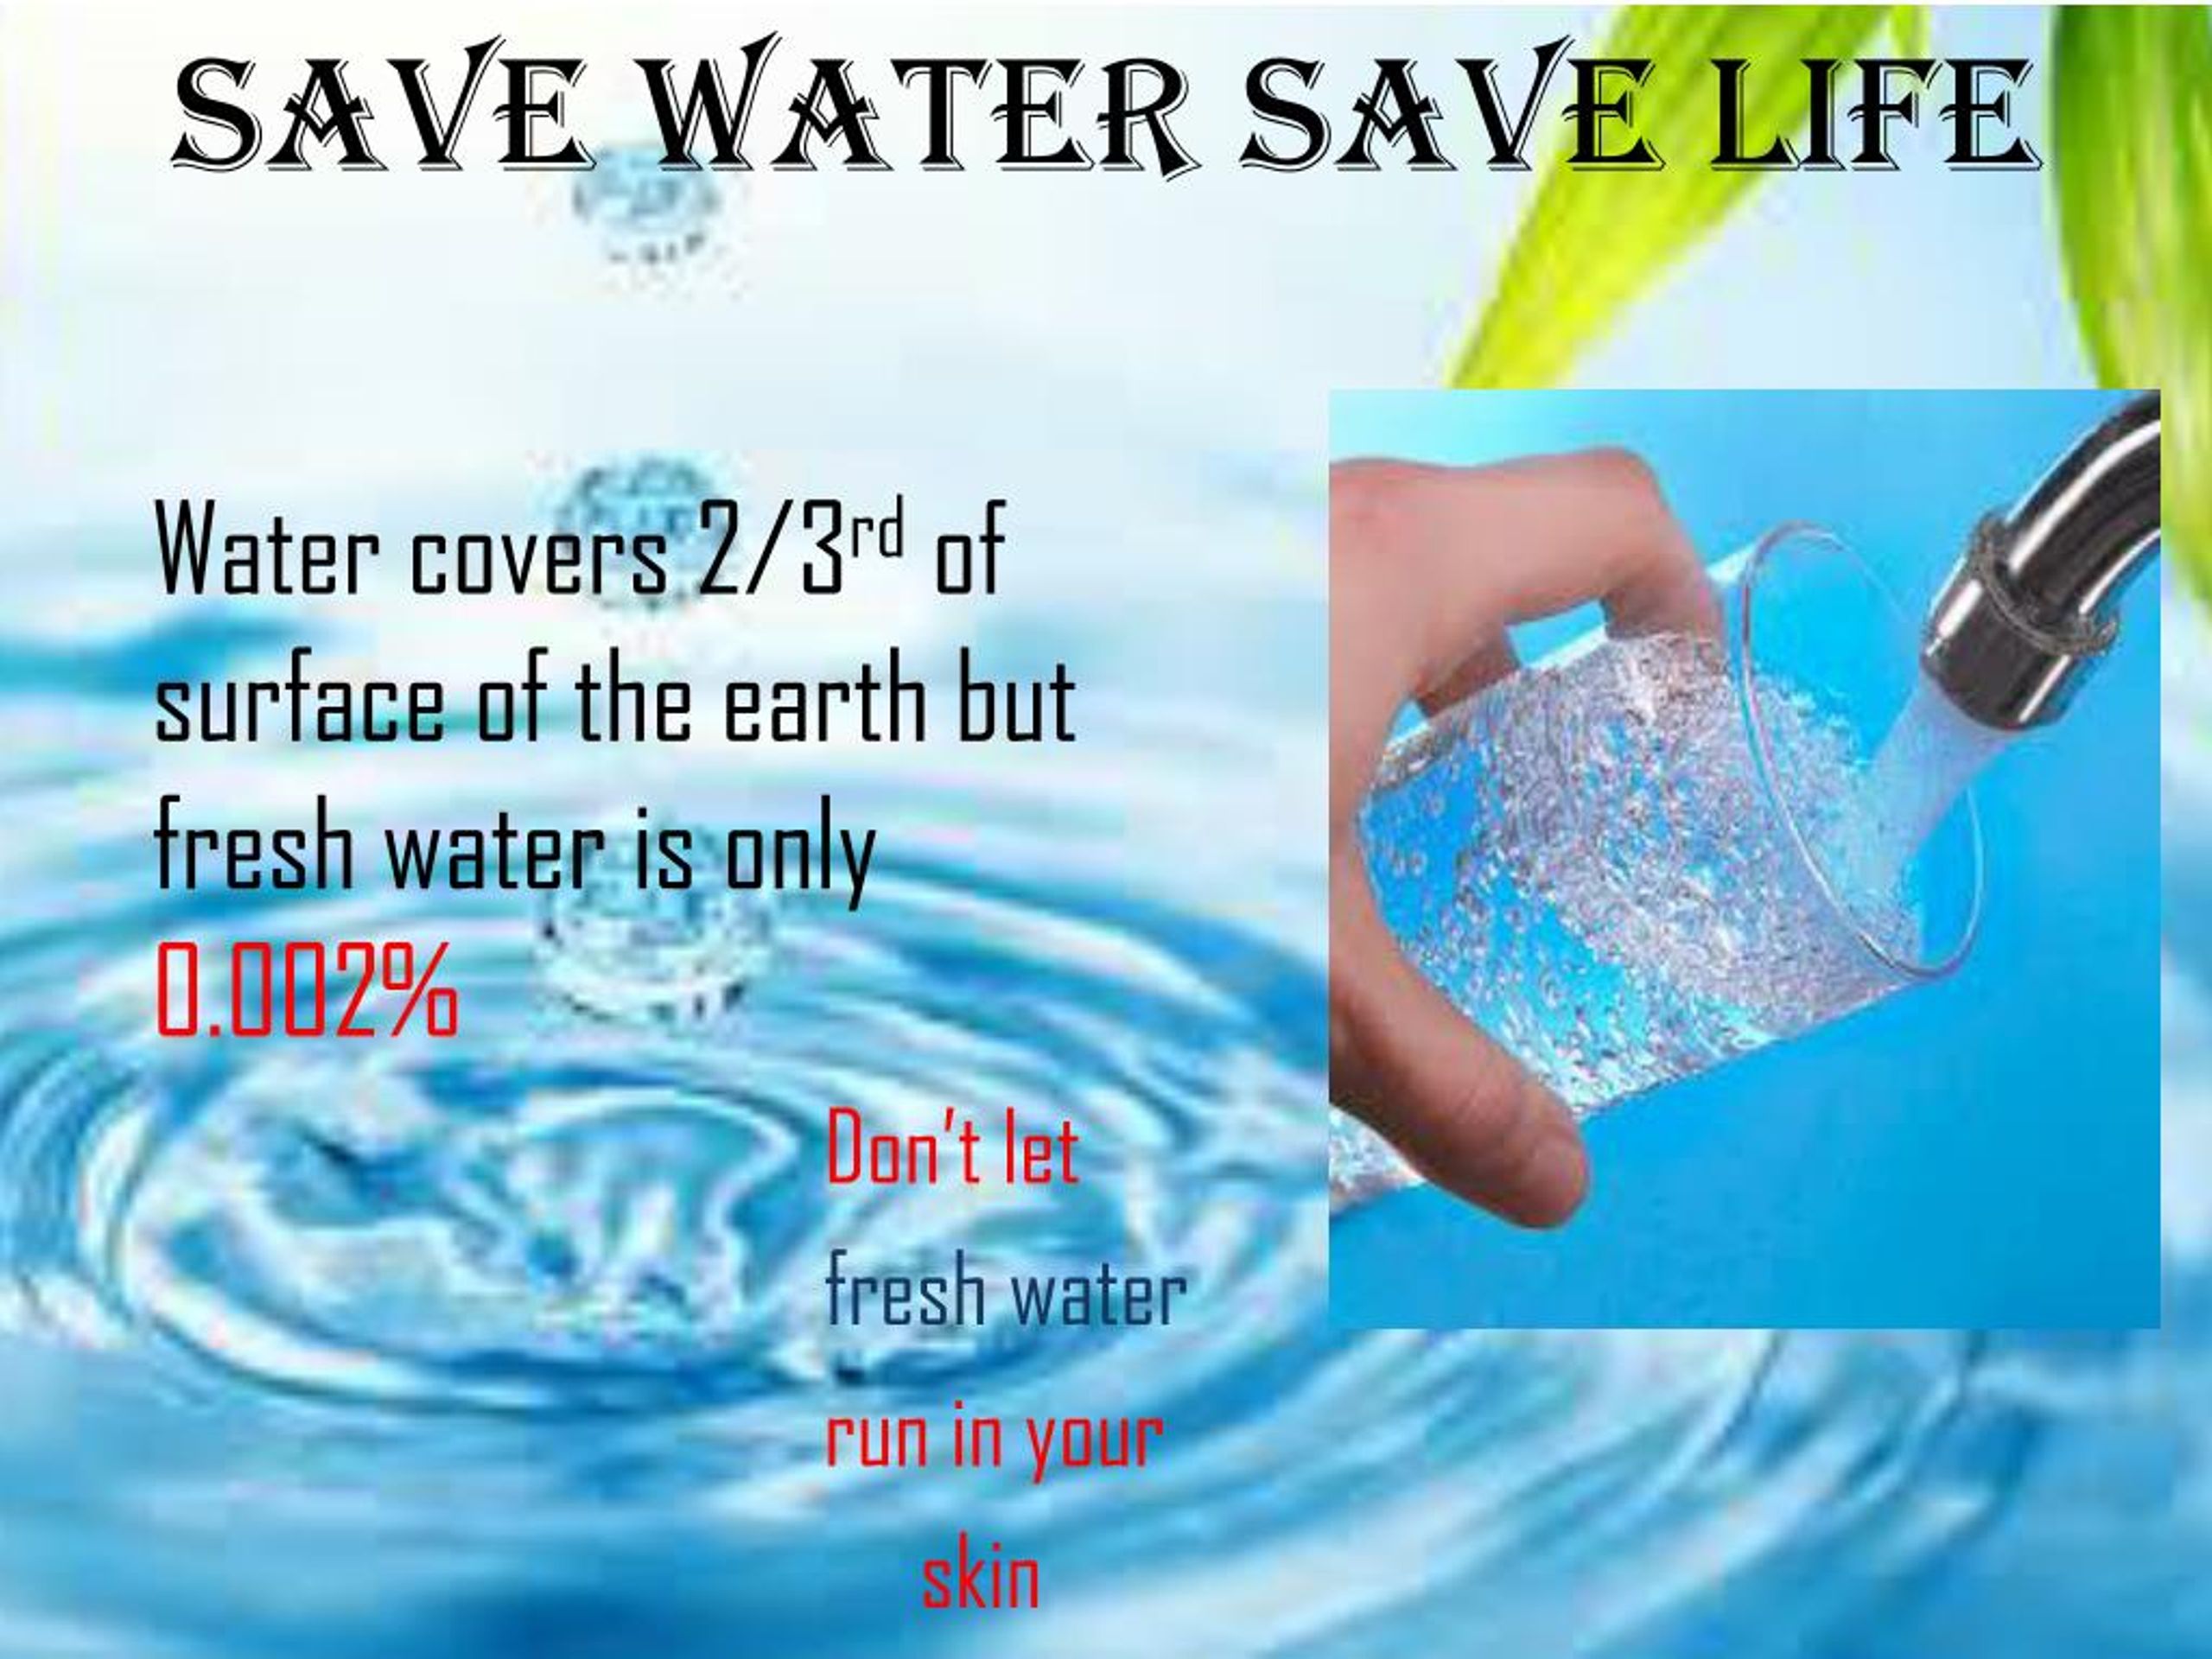 power point presentation on save water